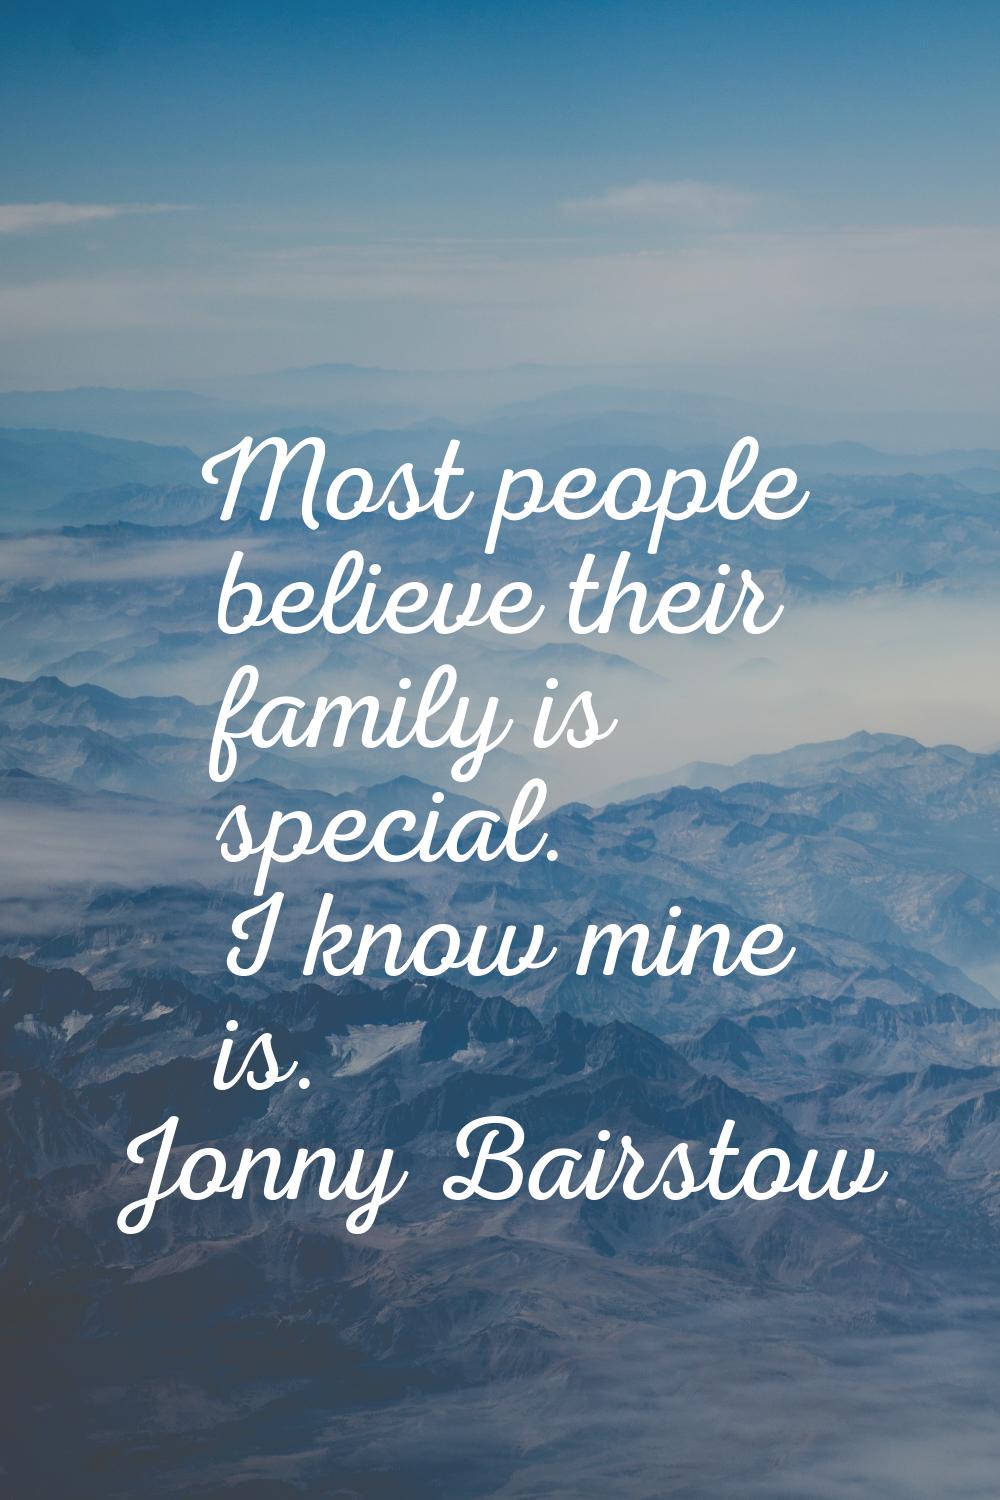 Most people believe their family is special. I know mine is.